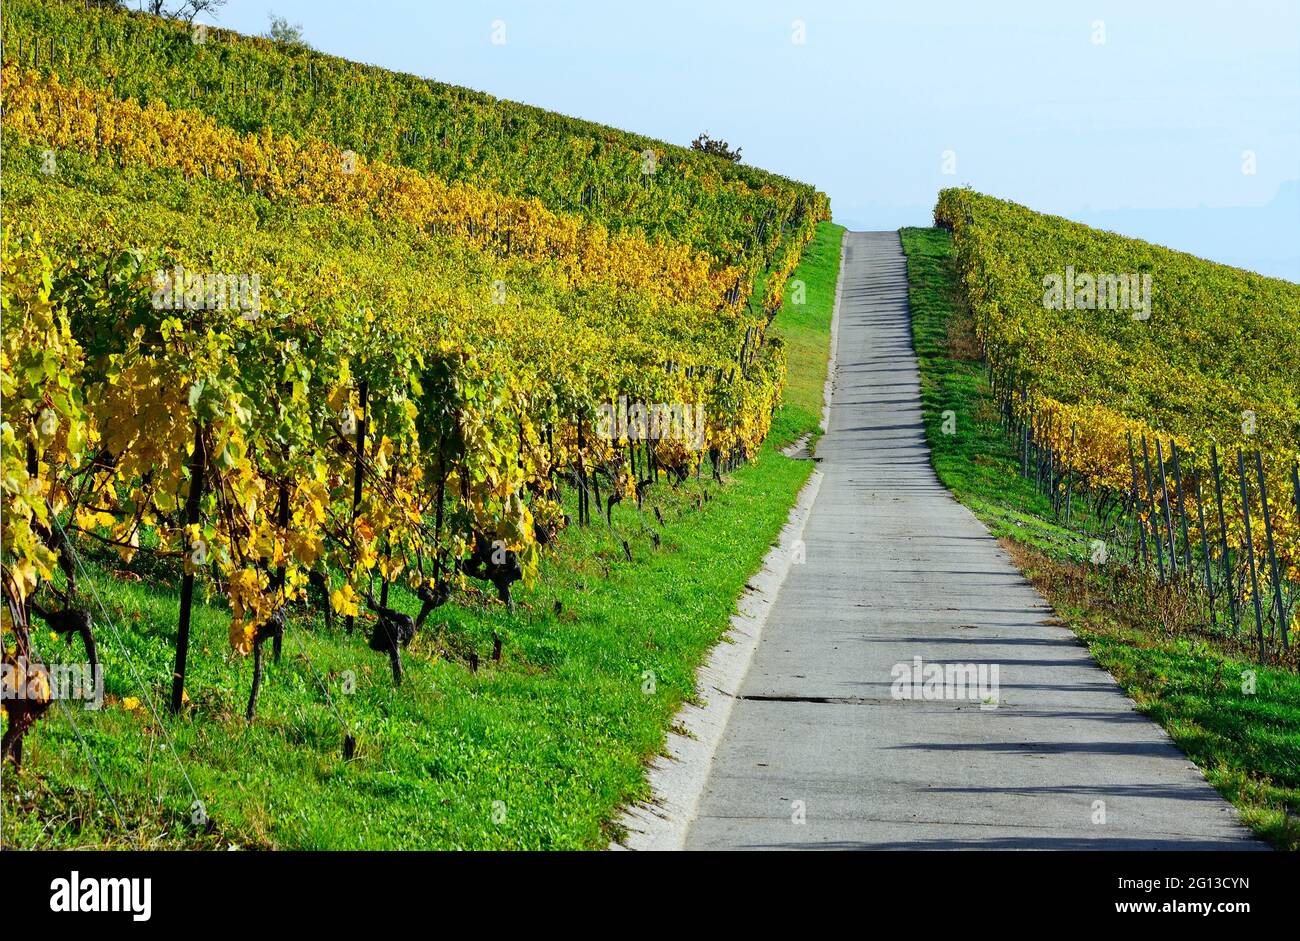 Road in vineyards, Mont-sur-Rolle, literally Mont on Rolle, Nyon district, canton Vaud, Switzerland, Europe Stock Photo